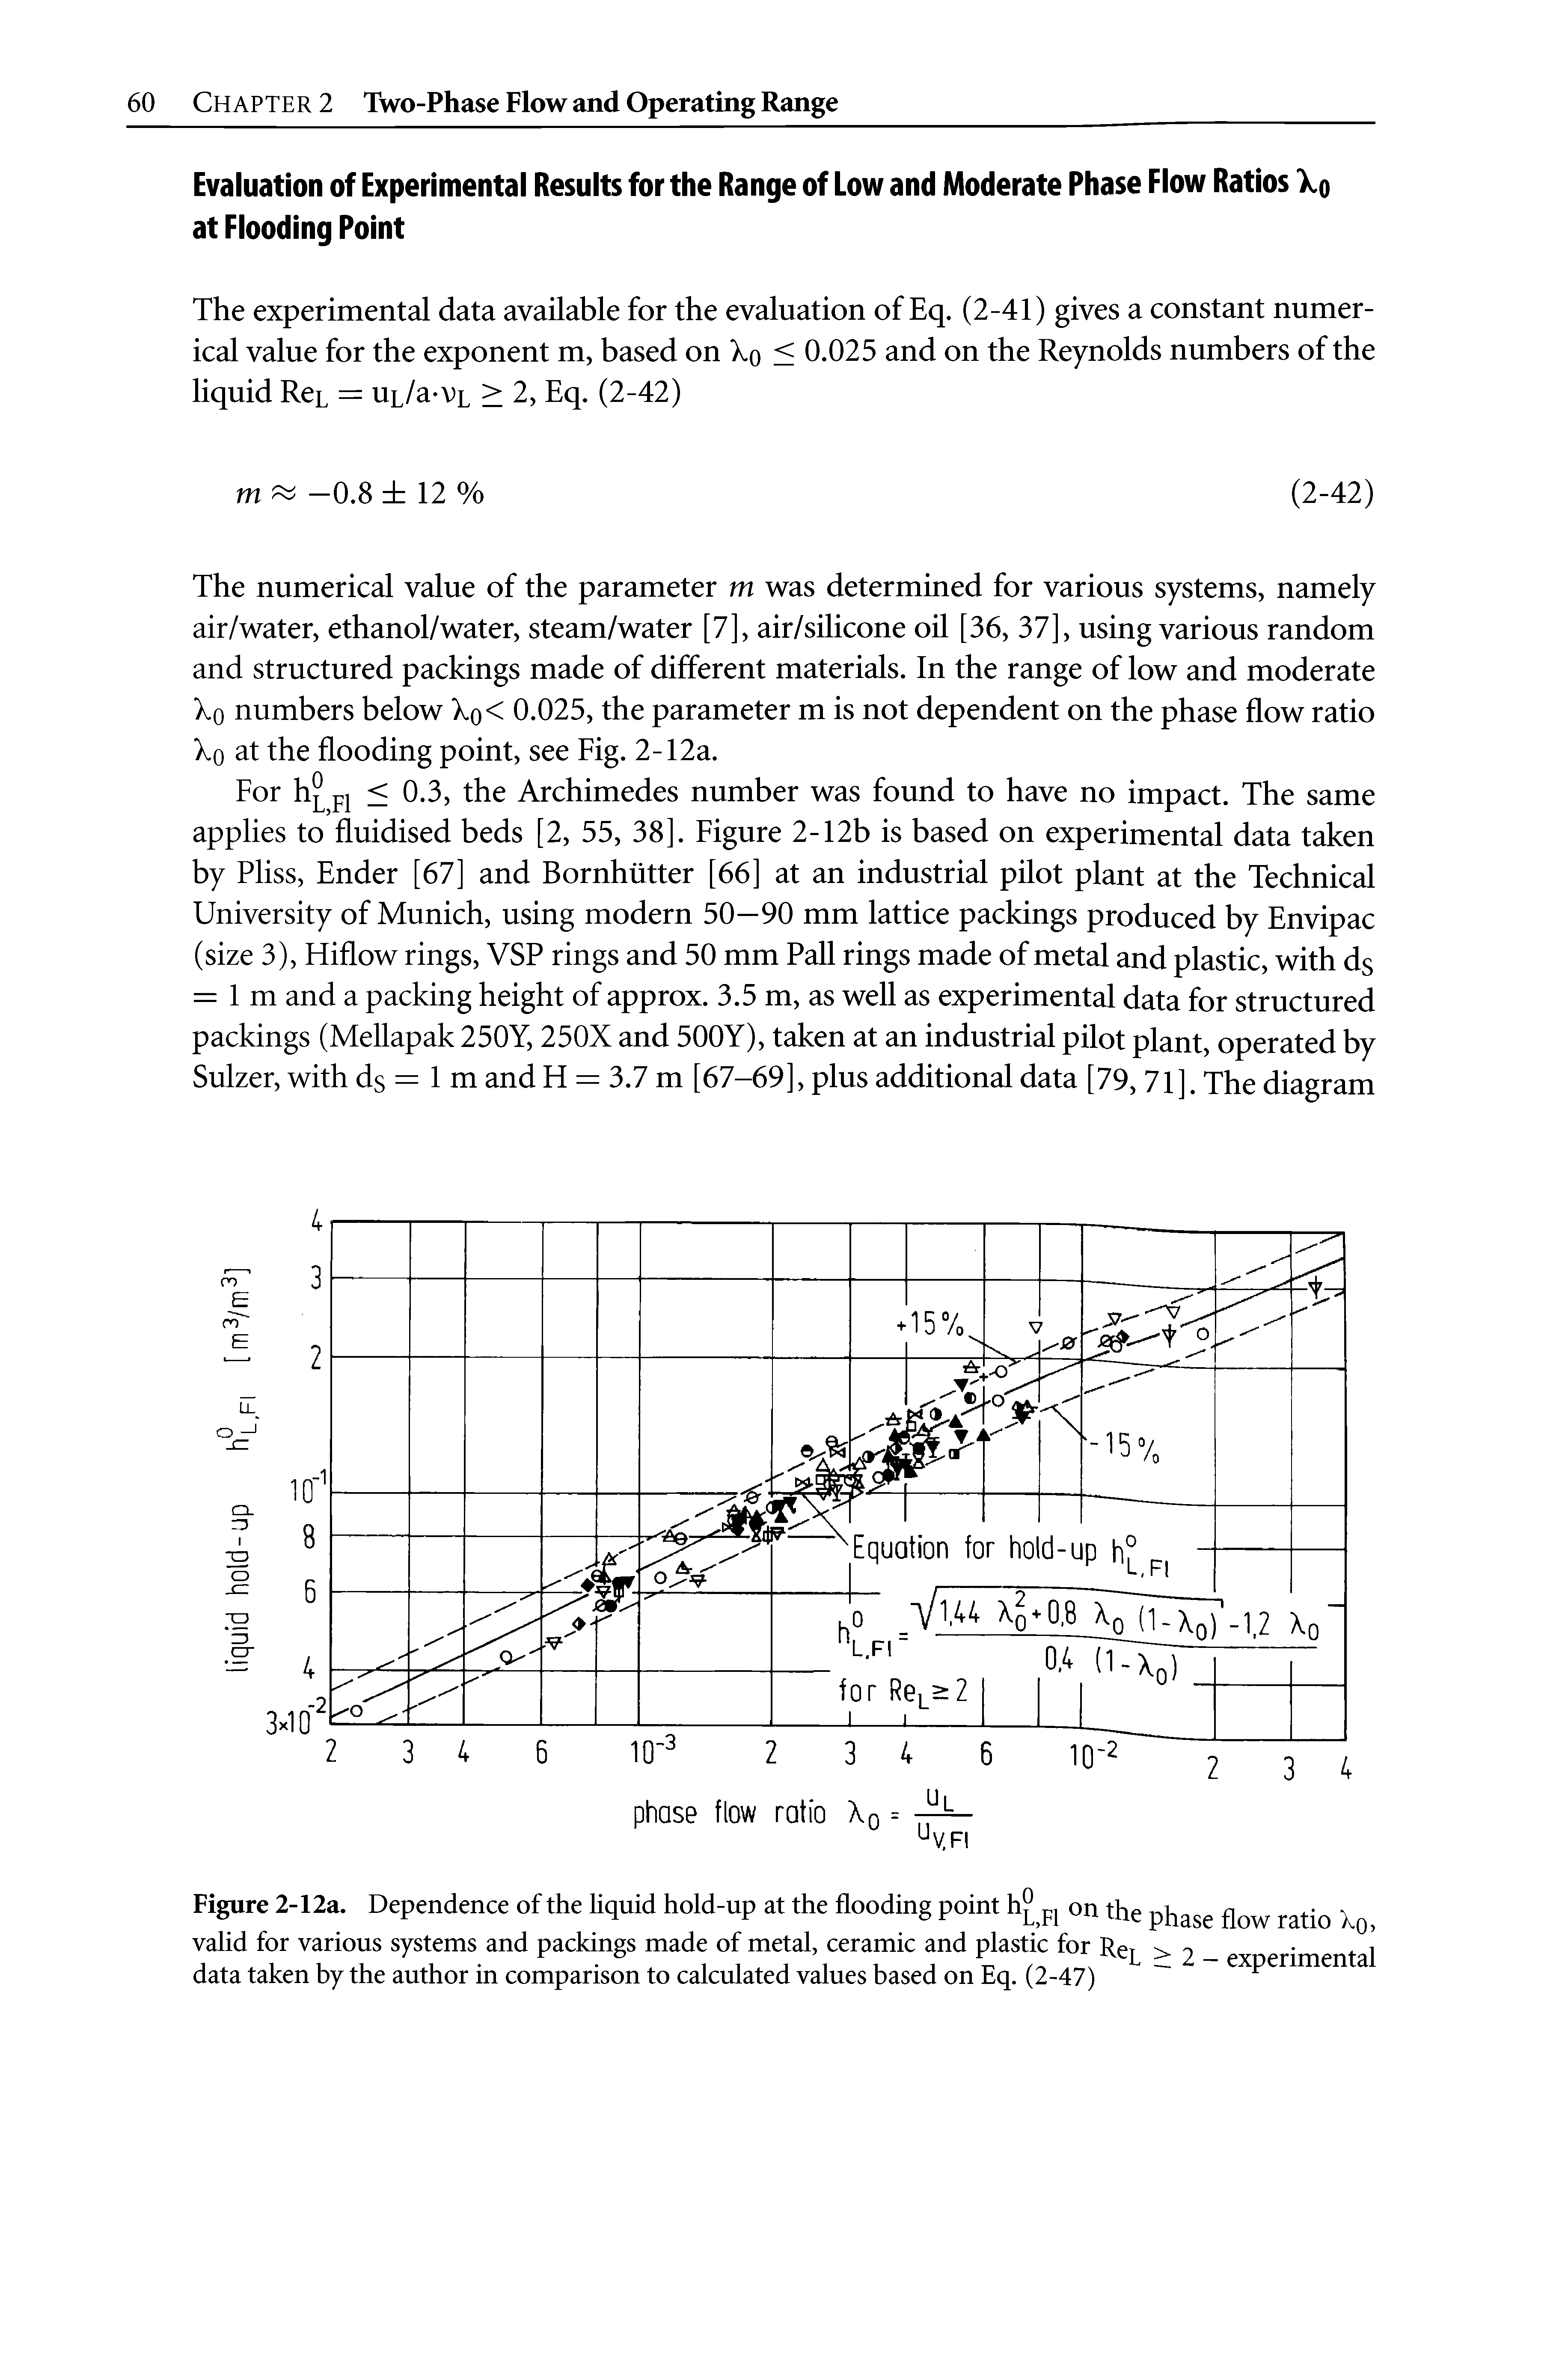 Figure 2-12a. Dependence of the liquid hold-up at the flooding point h p on the phase flow ratio Xq, valid for various systems and packings made of metal, ceramic and plastic for Rep > 2 - experimental data taken by the author in comparison to calculated values based on Eq. (2-47)...